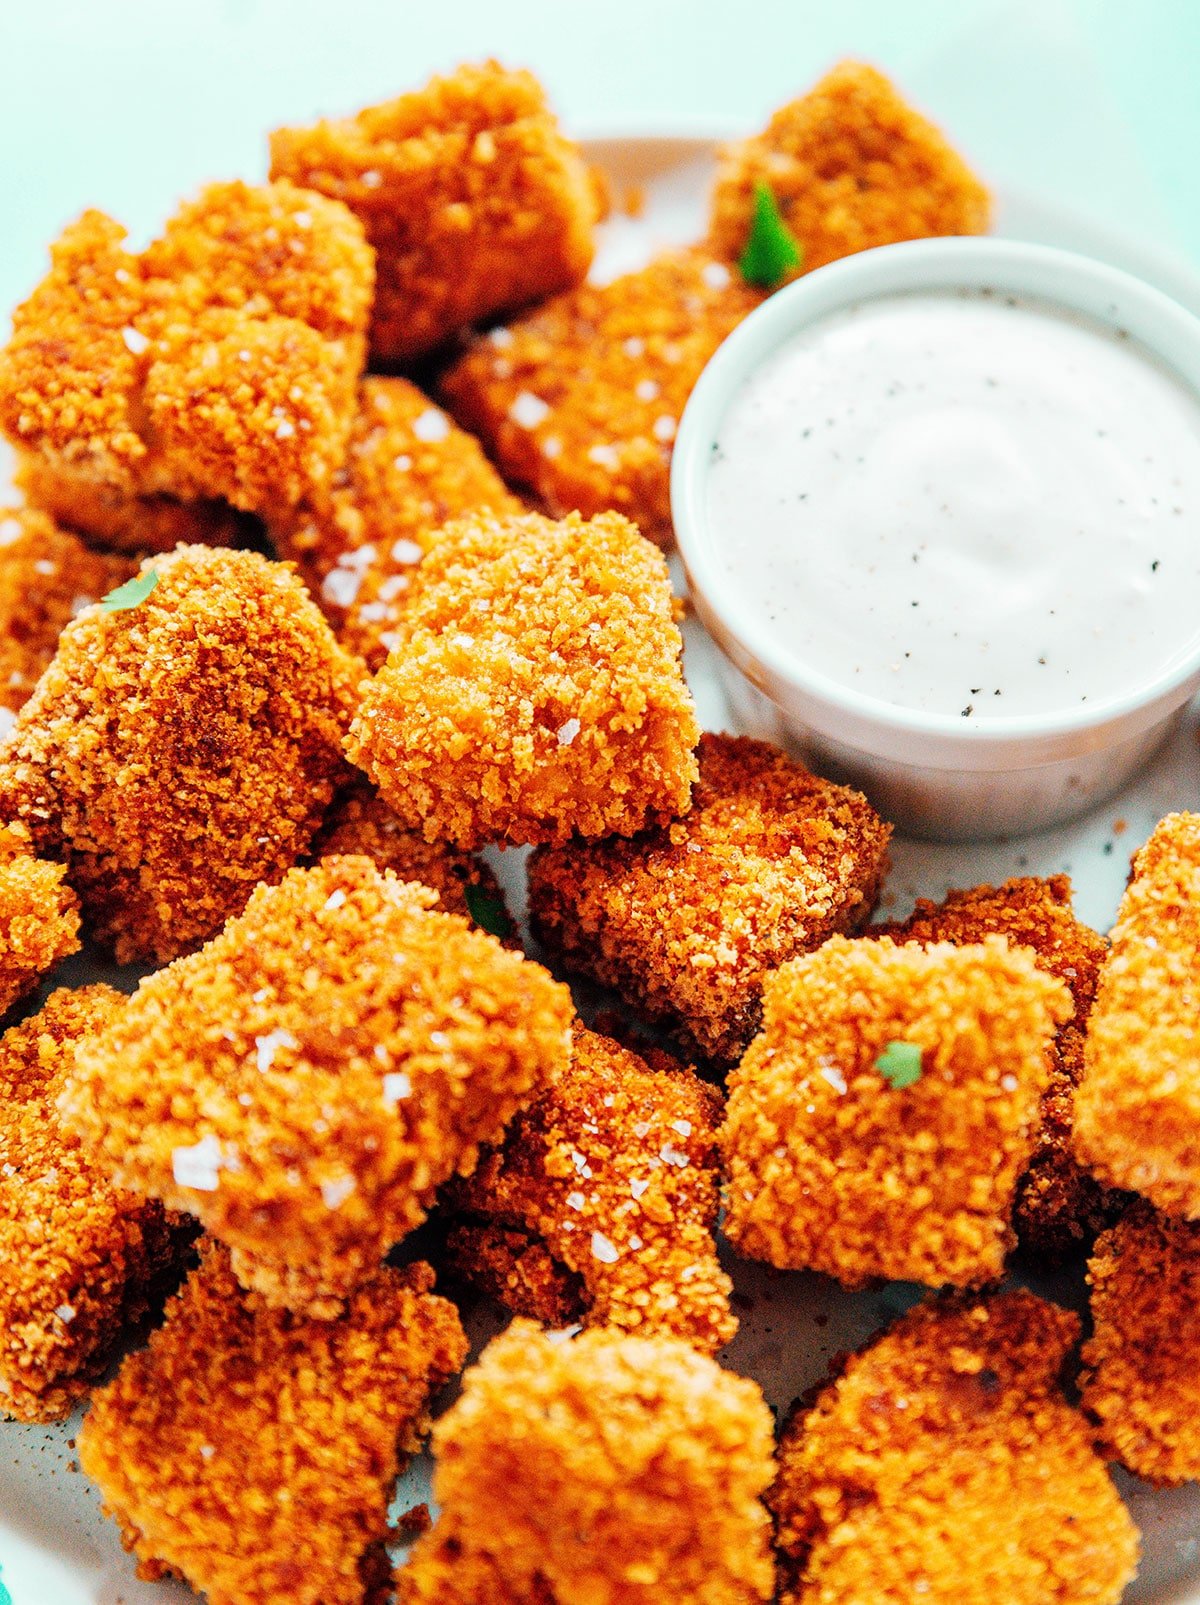 Breaded tofu nuggets on a platter with a small bowl of ranch dressing.